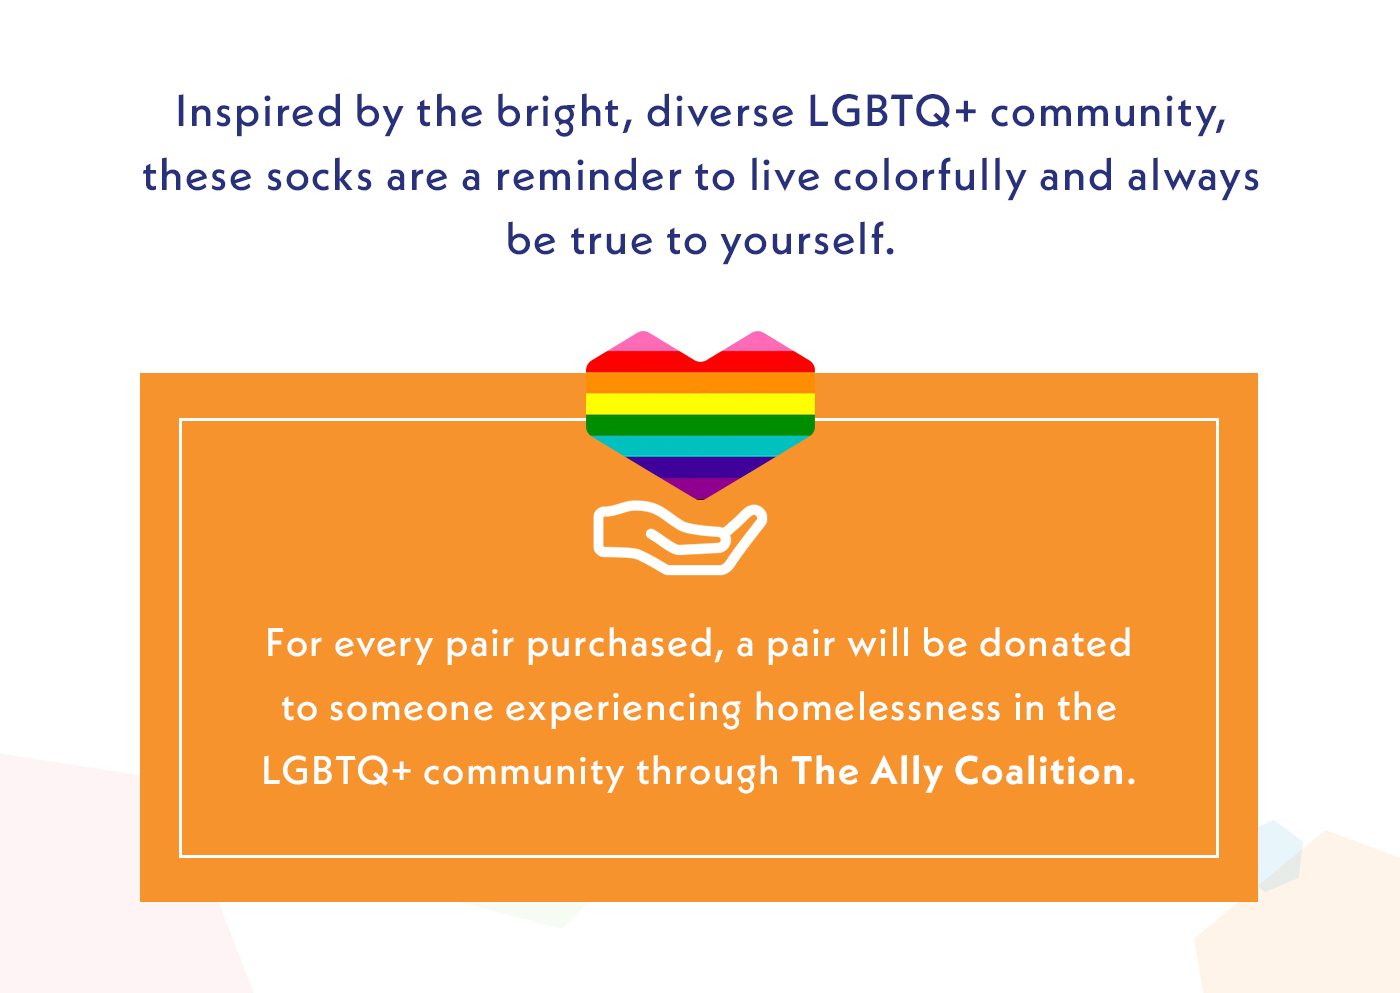 Inspired by the bright, diverse LGBTQ+ community, these socks are a reminder to live colorfully and always be true to yourself. | For every pair purchased, a pair will be donated to someone experiencing homelessness in the LGBTQ+ community through The Ally Coalition.